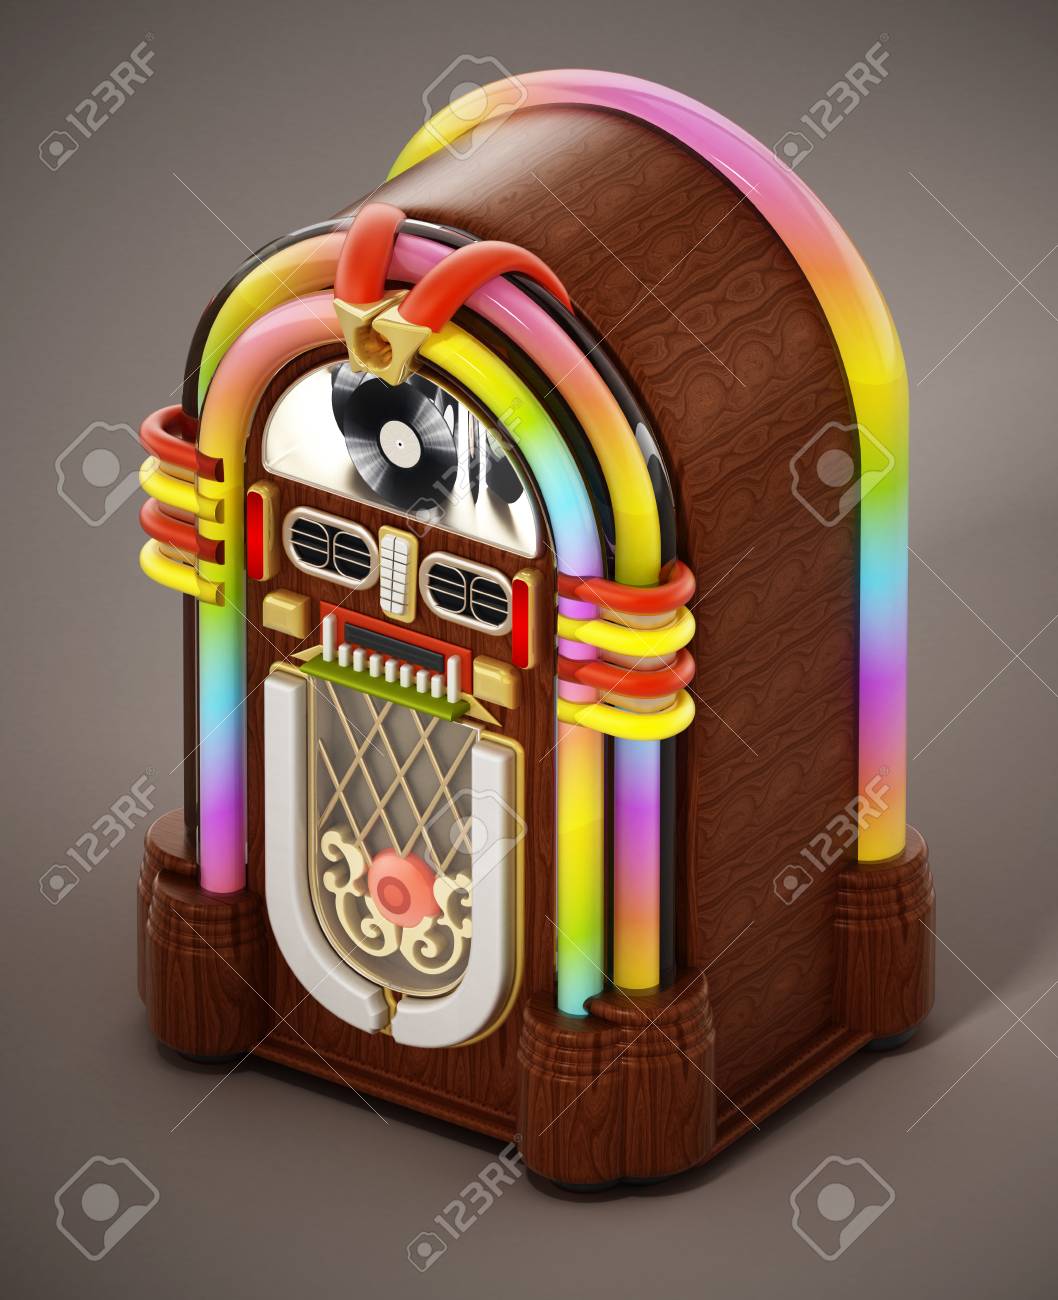 Jukebox Standing On Brown Background 3d Illustration Stock Photo